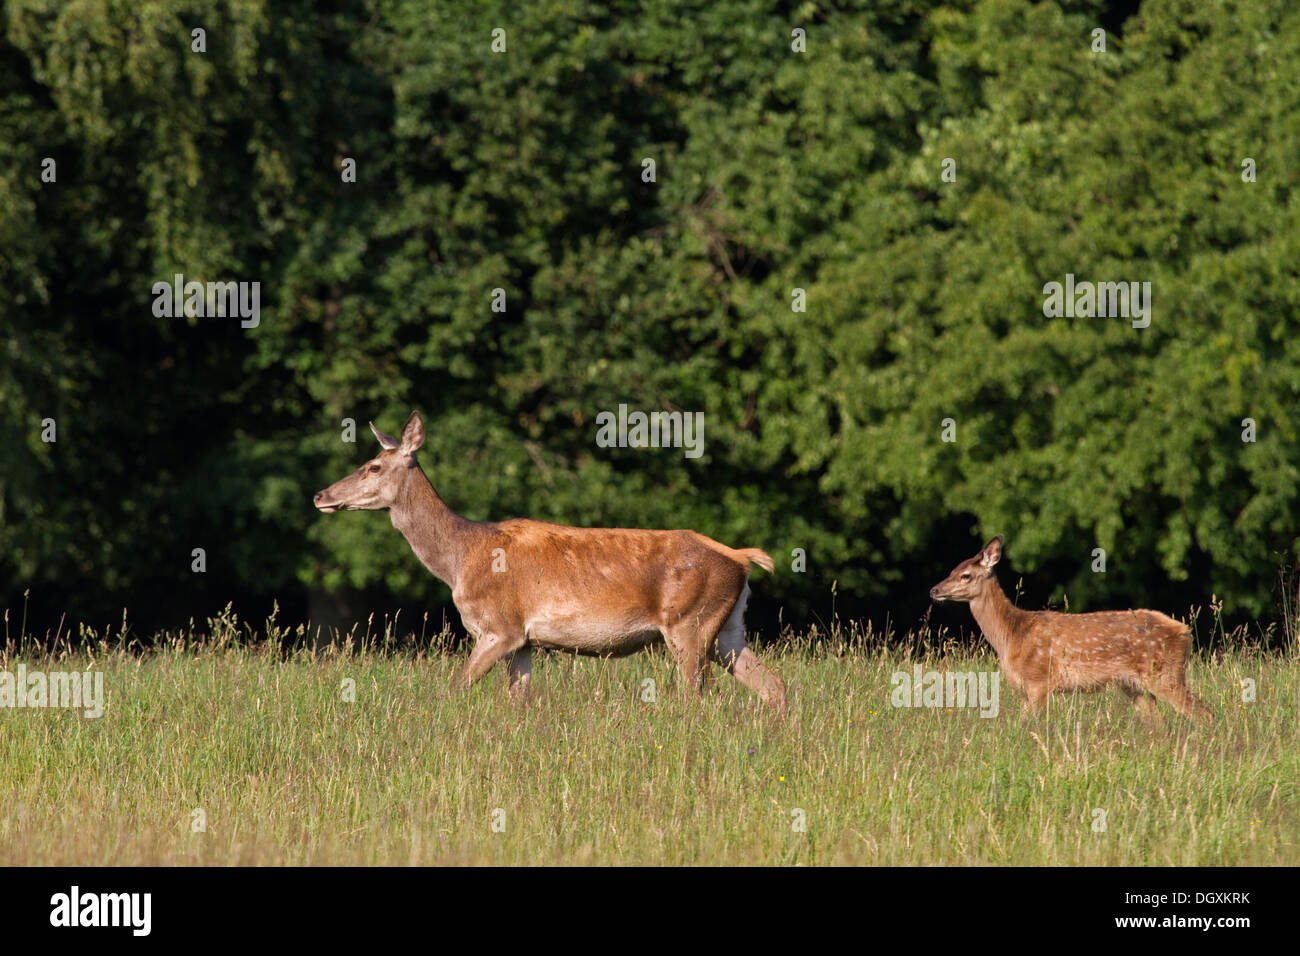 Red deer with young animal / Cervus elaphus Stock Photo